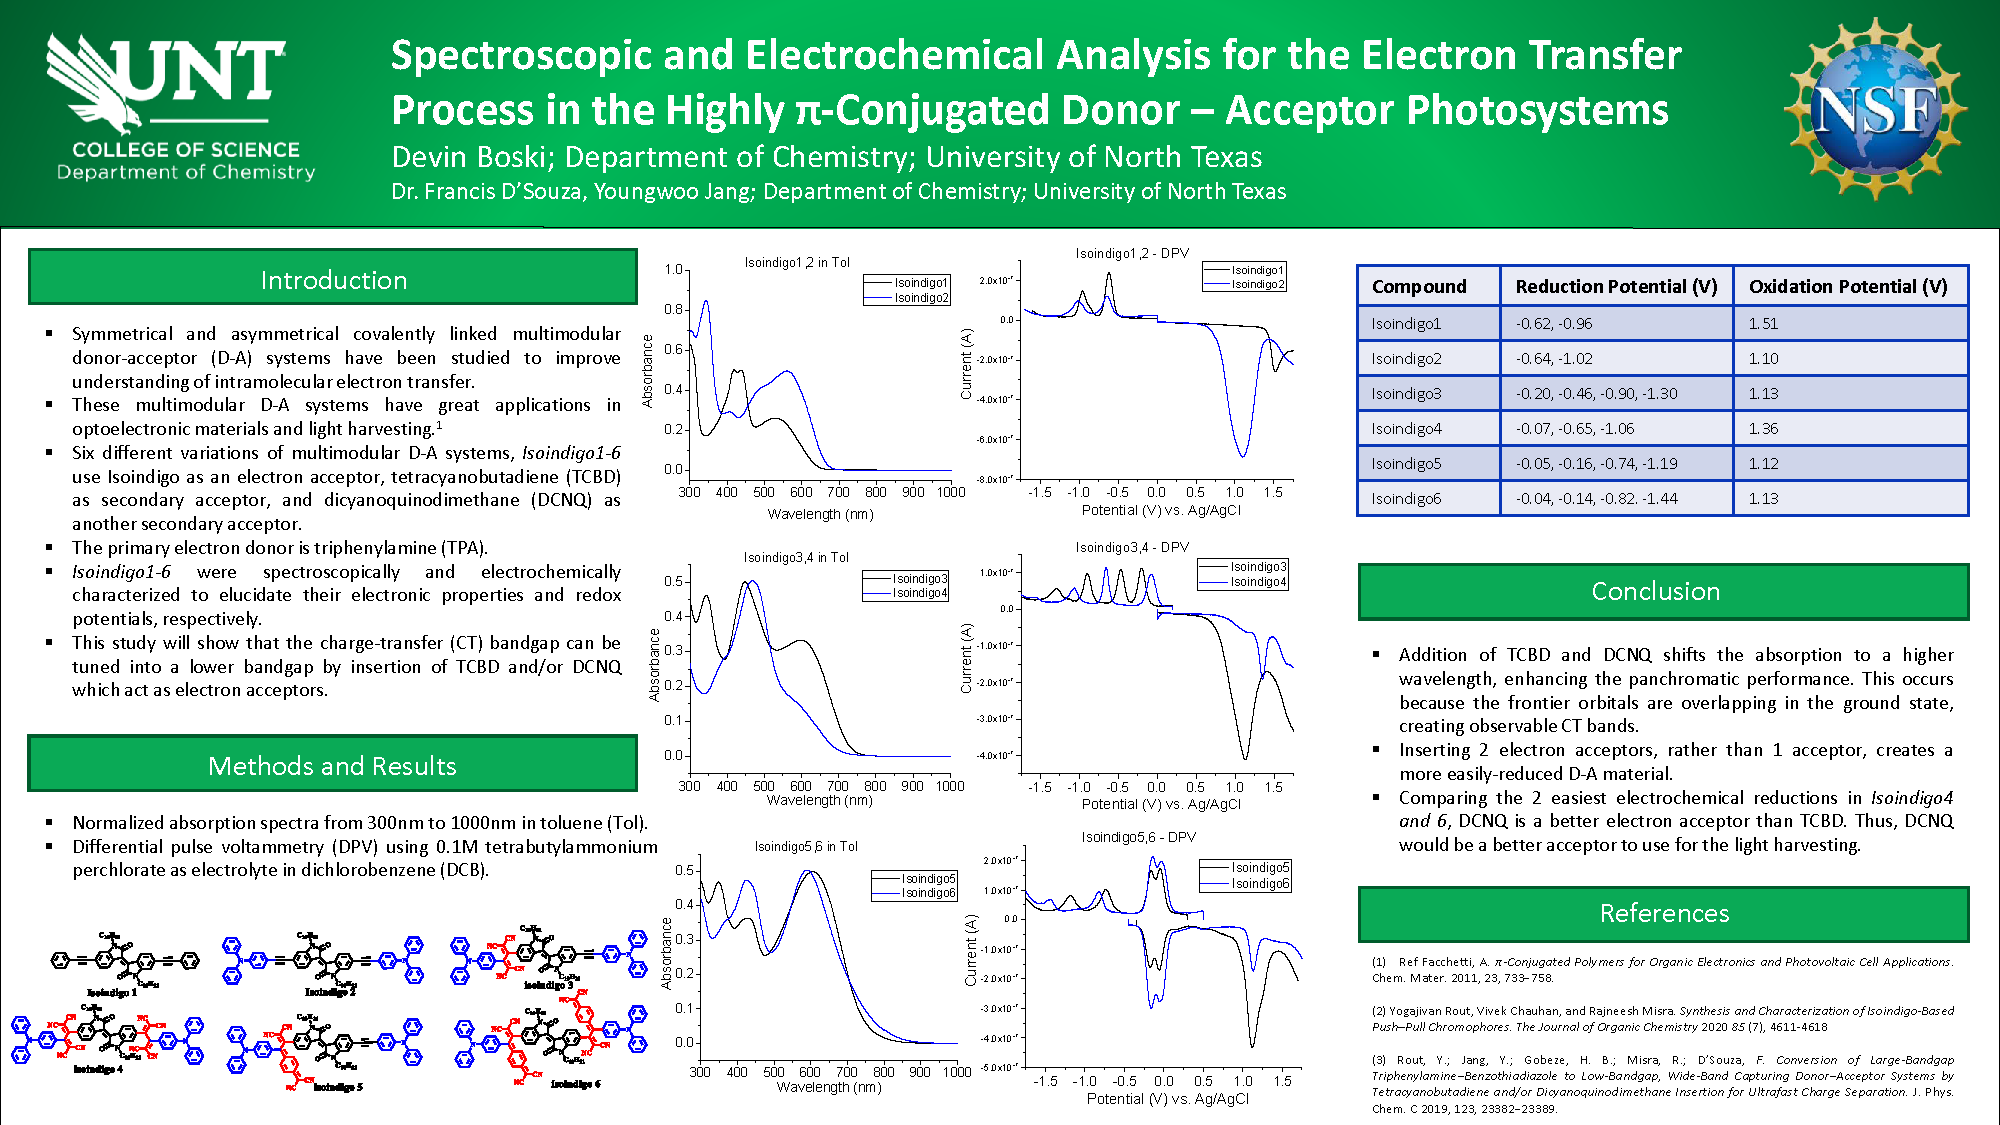 Spectroscopic and Electrochemical Analysis for the Electron Transfer Process in Highly π-Conjugated 